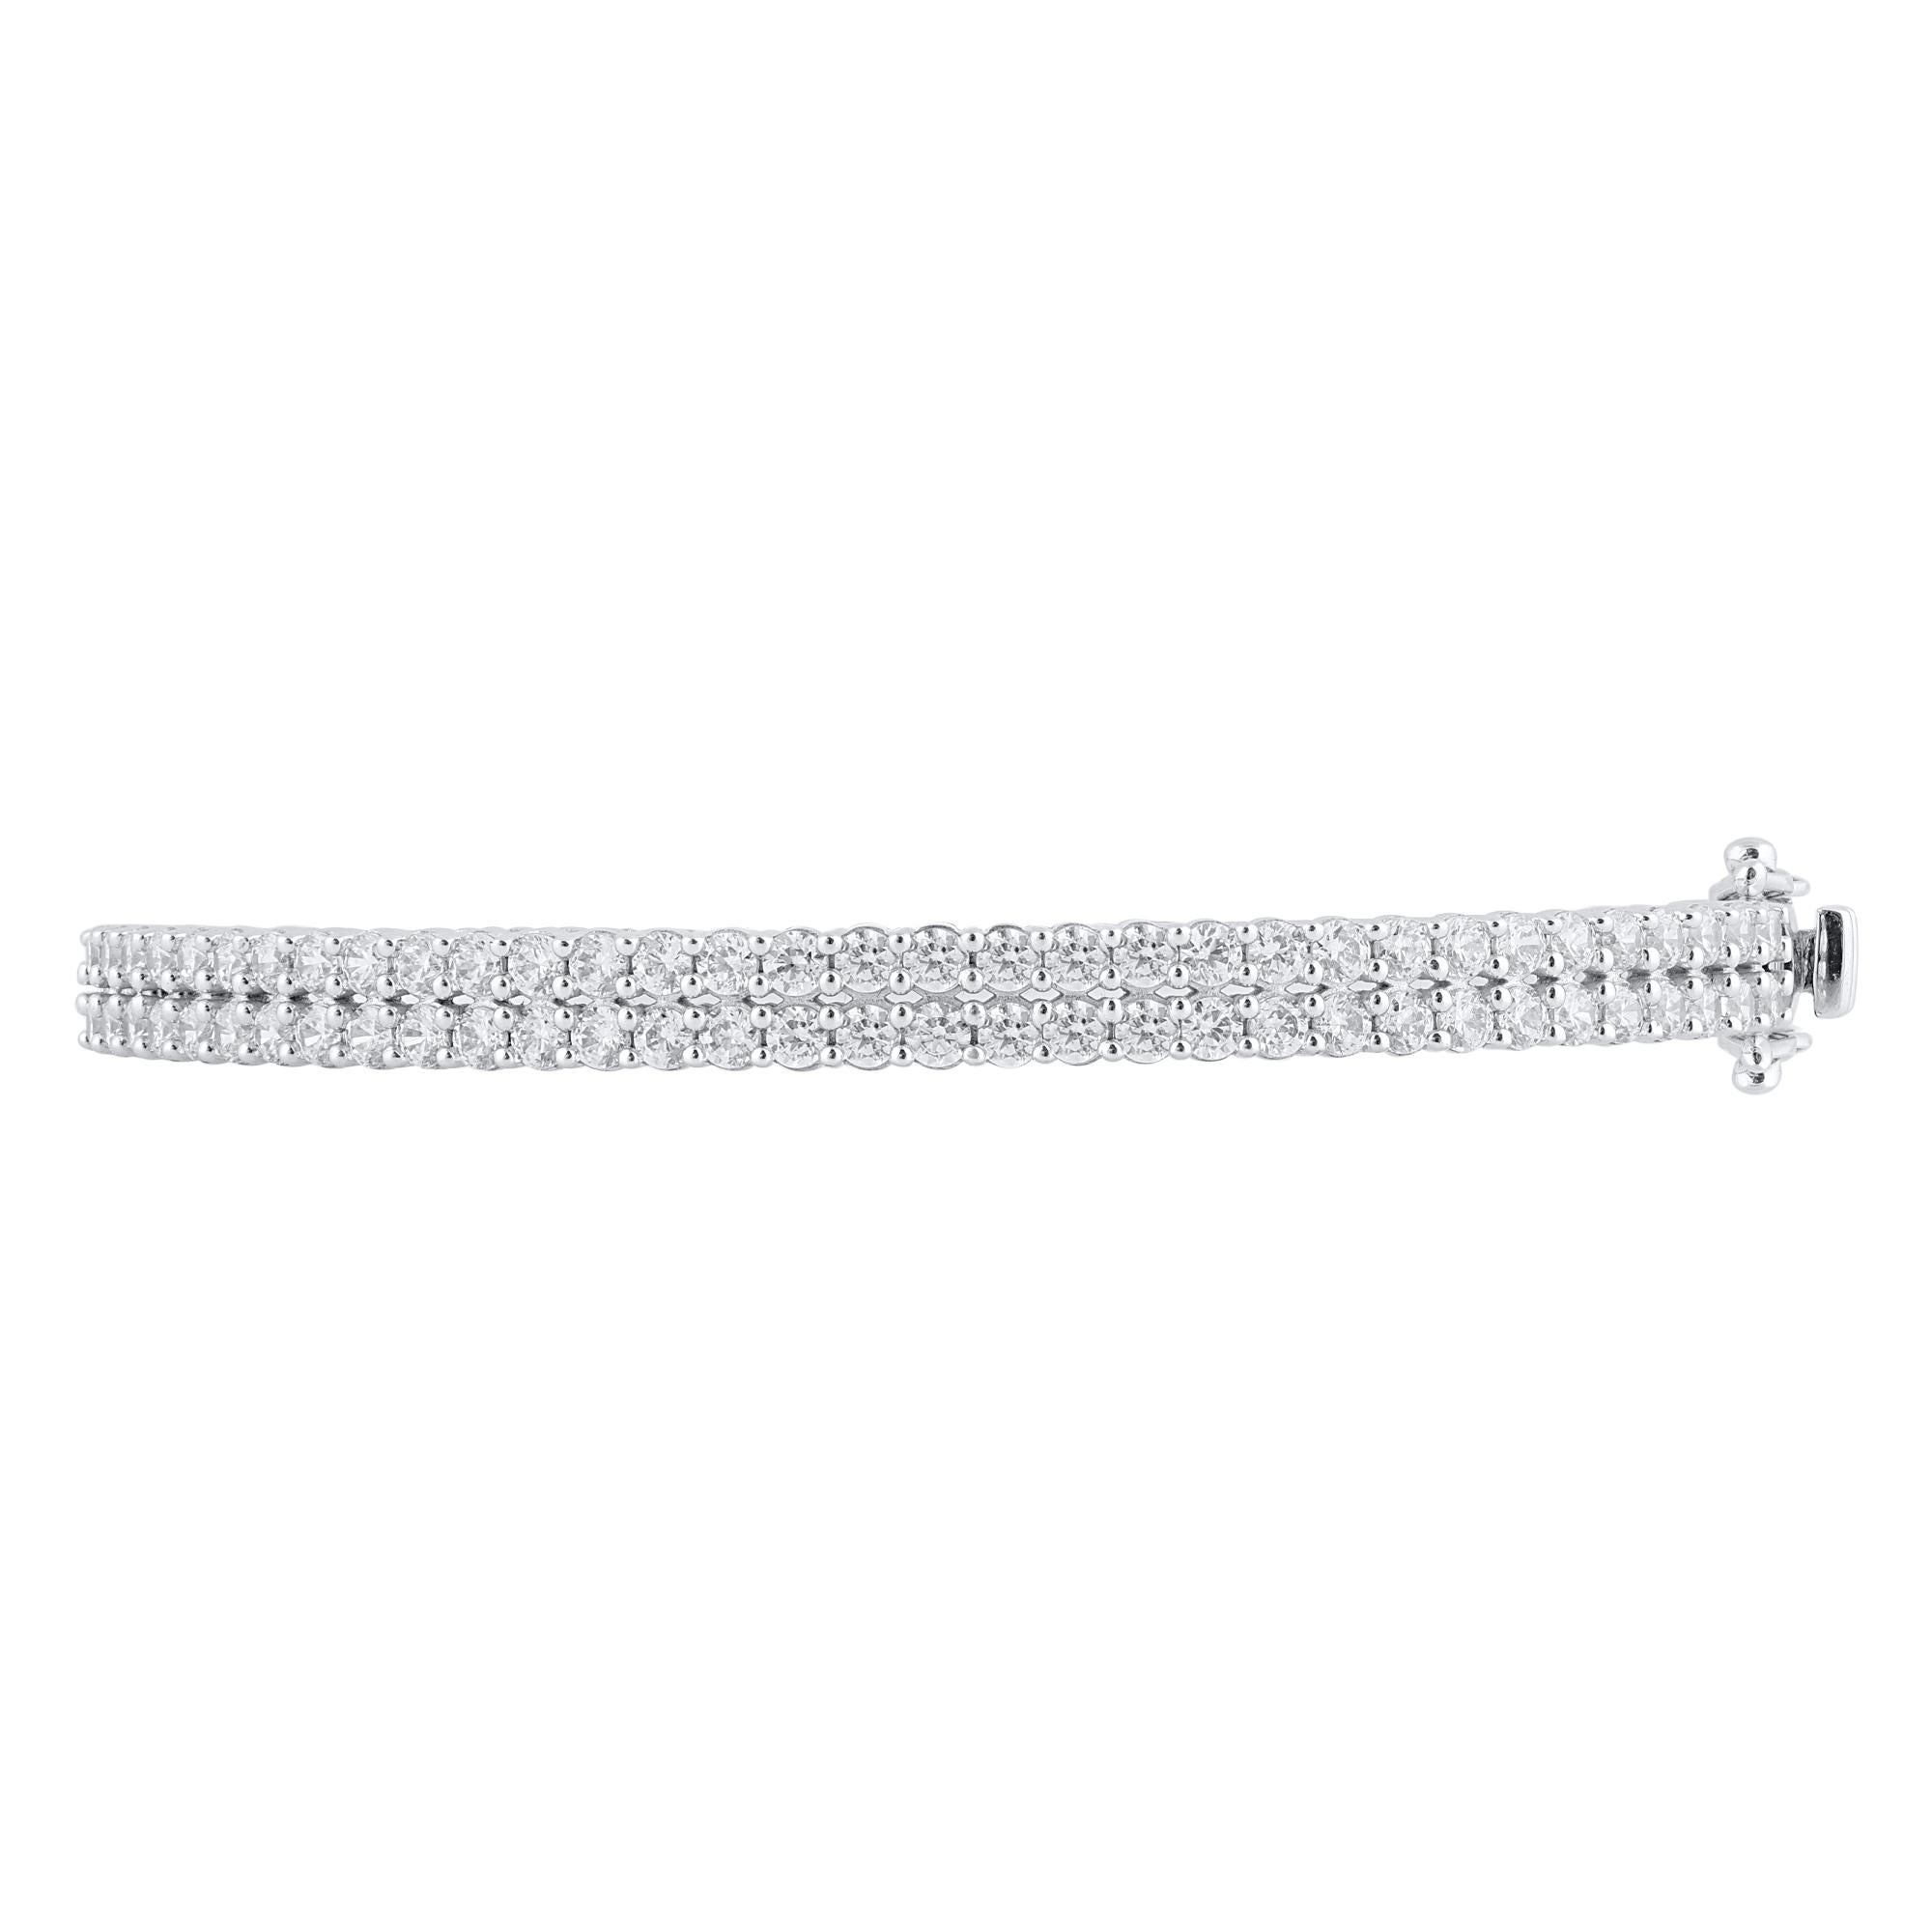 Classic and sophisticated, this diamond bangle bracelet pairs well with any attire.
This Shimmering bangle features 66 rounds natural diamonds in prong setting and crafted 14 kt white gold. Diamonds are graded H-I color, I2 clarity. 

